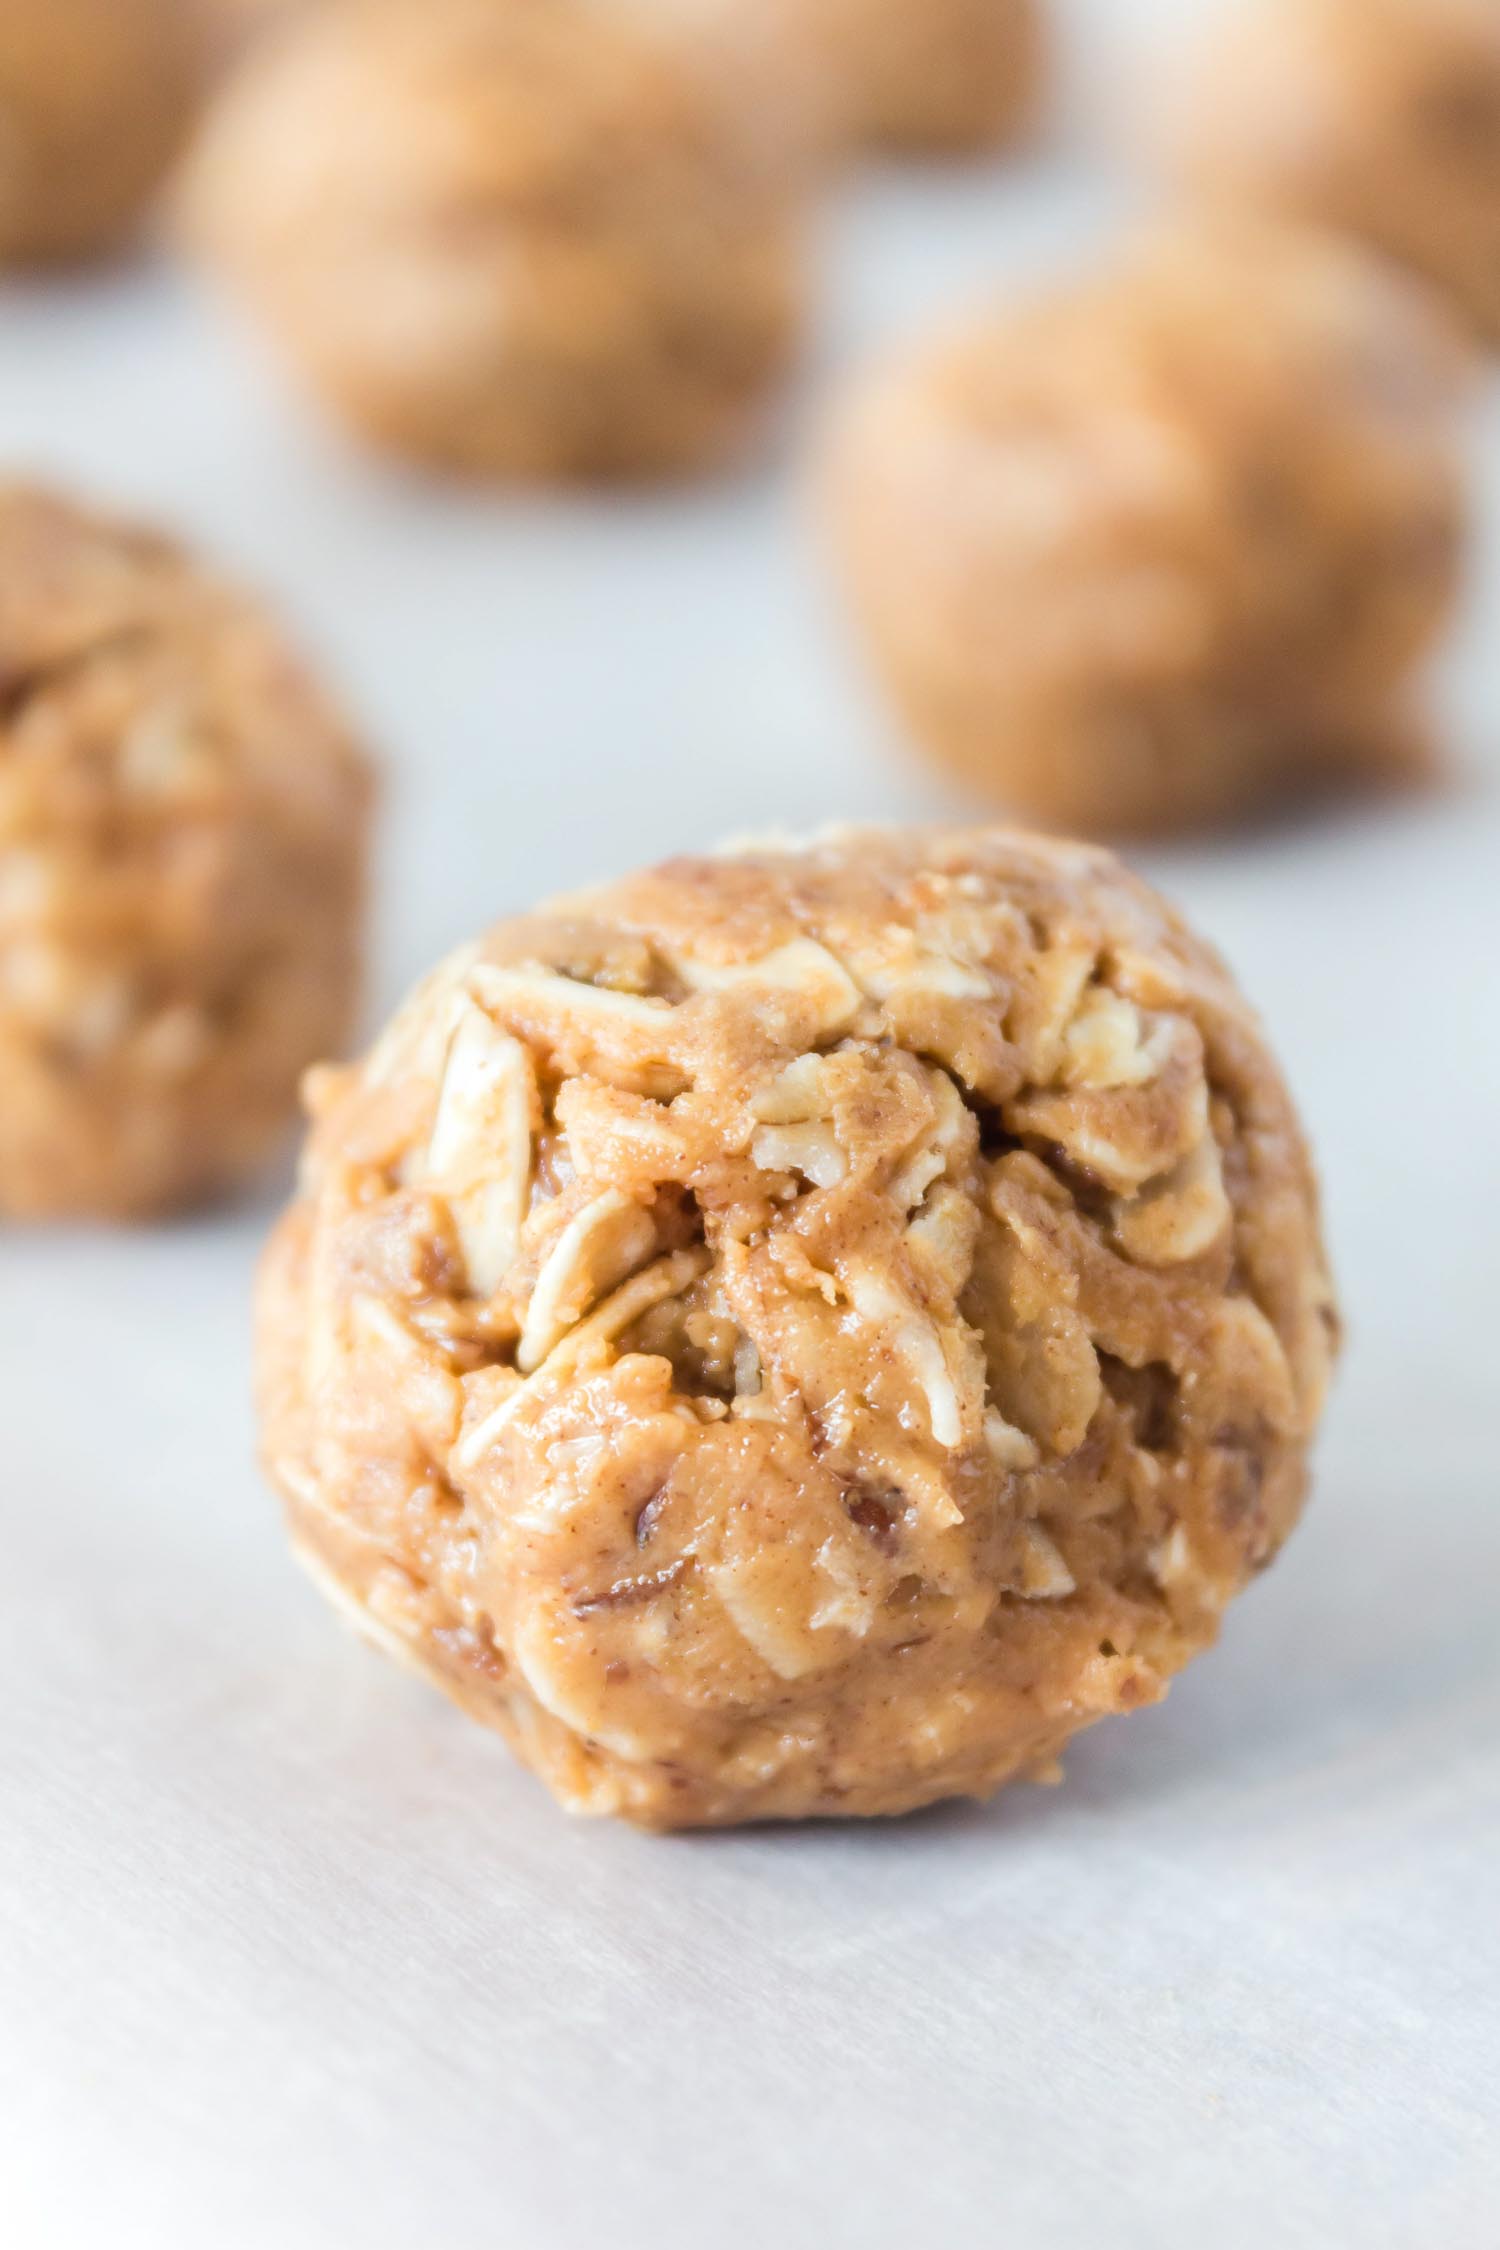 A protein ball up close on parchment paper with other balls behind it.